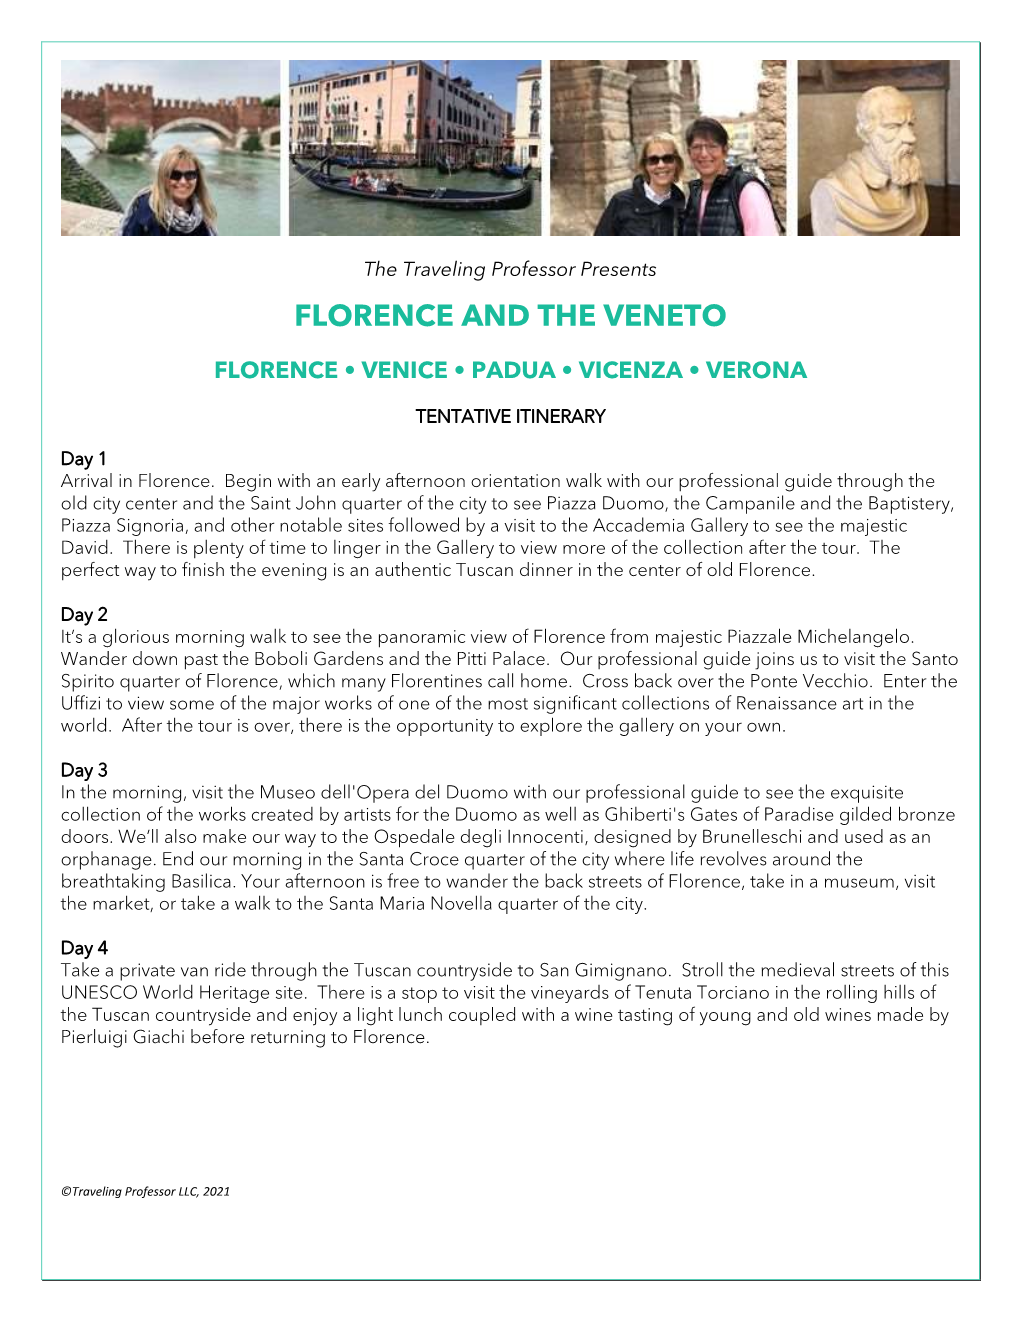 Florence and the Veneto